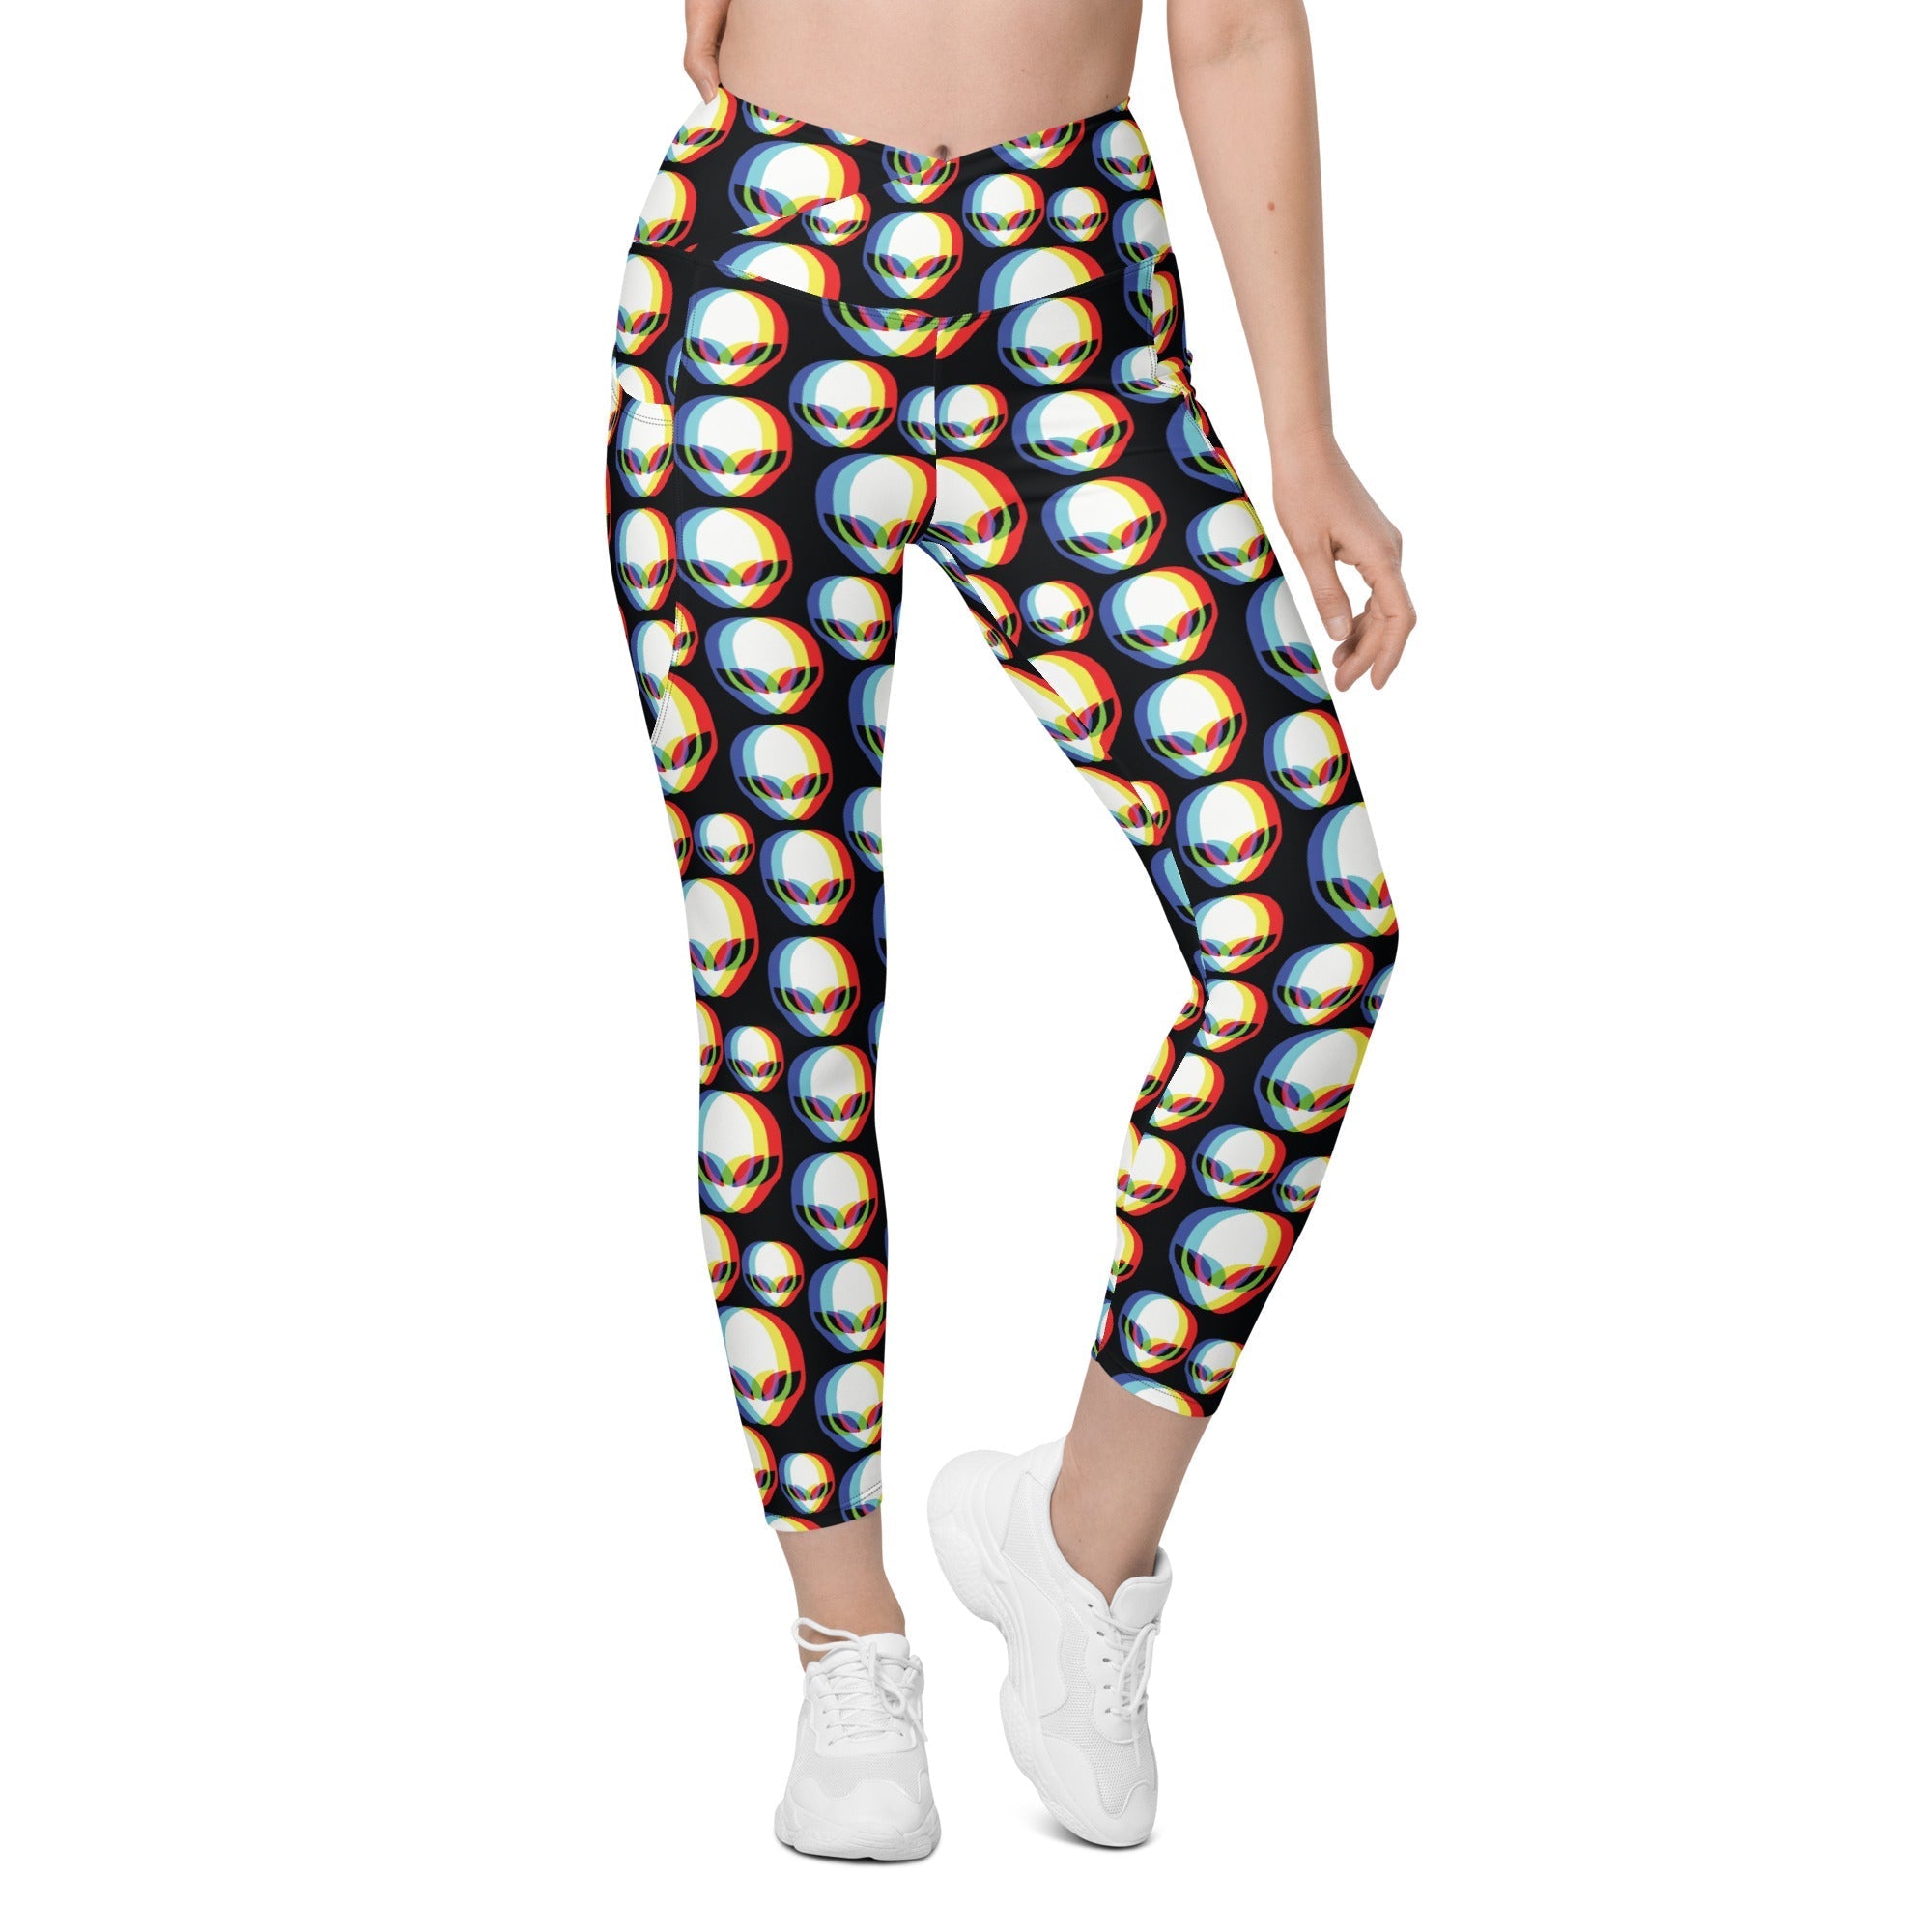 Trippy Alien Crossover Leggings With Pockets